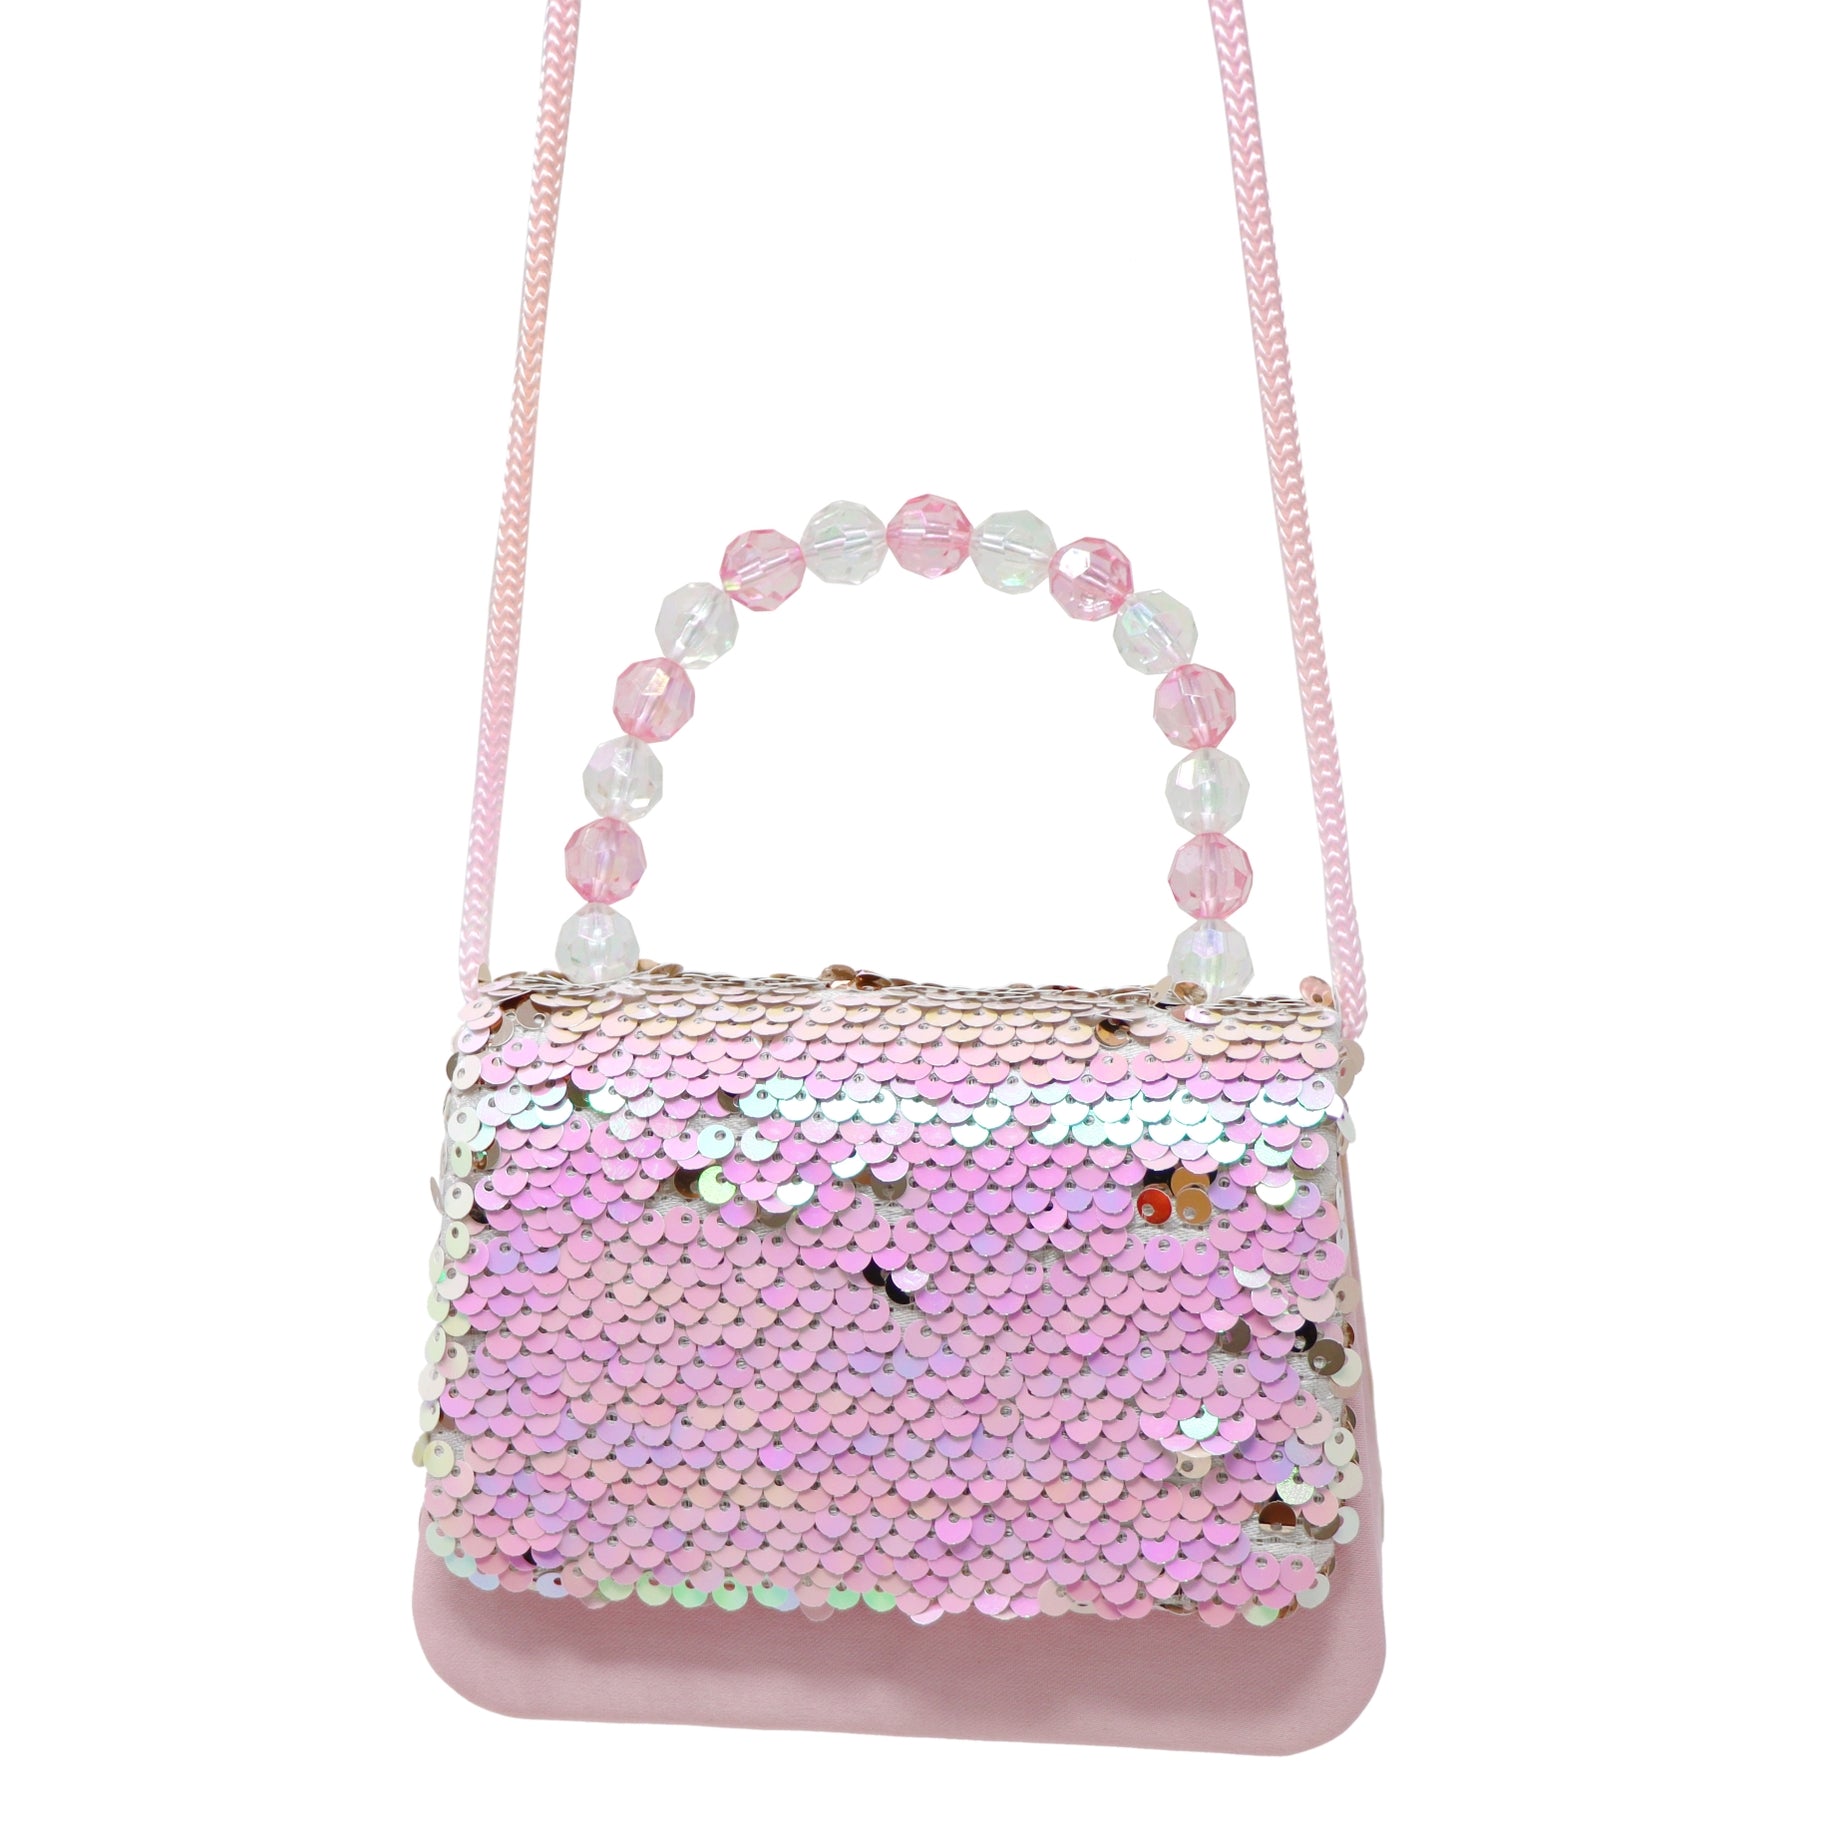 Kids Quilted Flap Shoulder Bag | Fashion Chain Purse - Mia Belle Girls